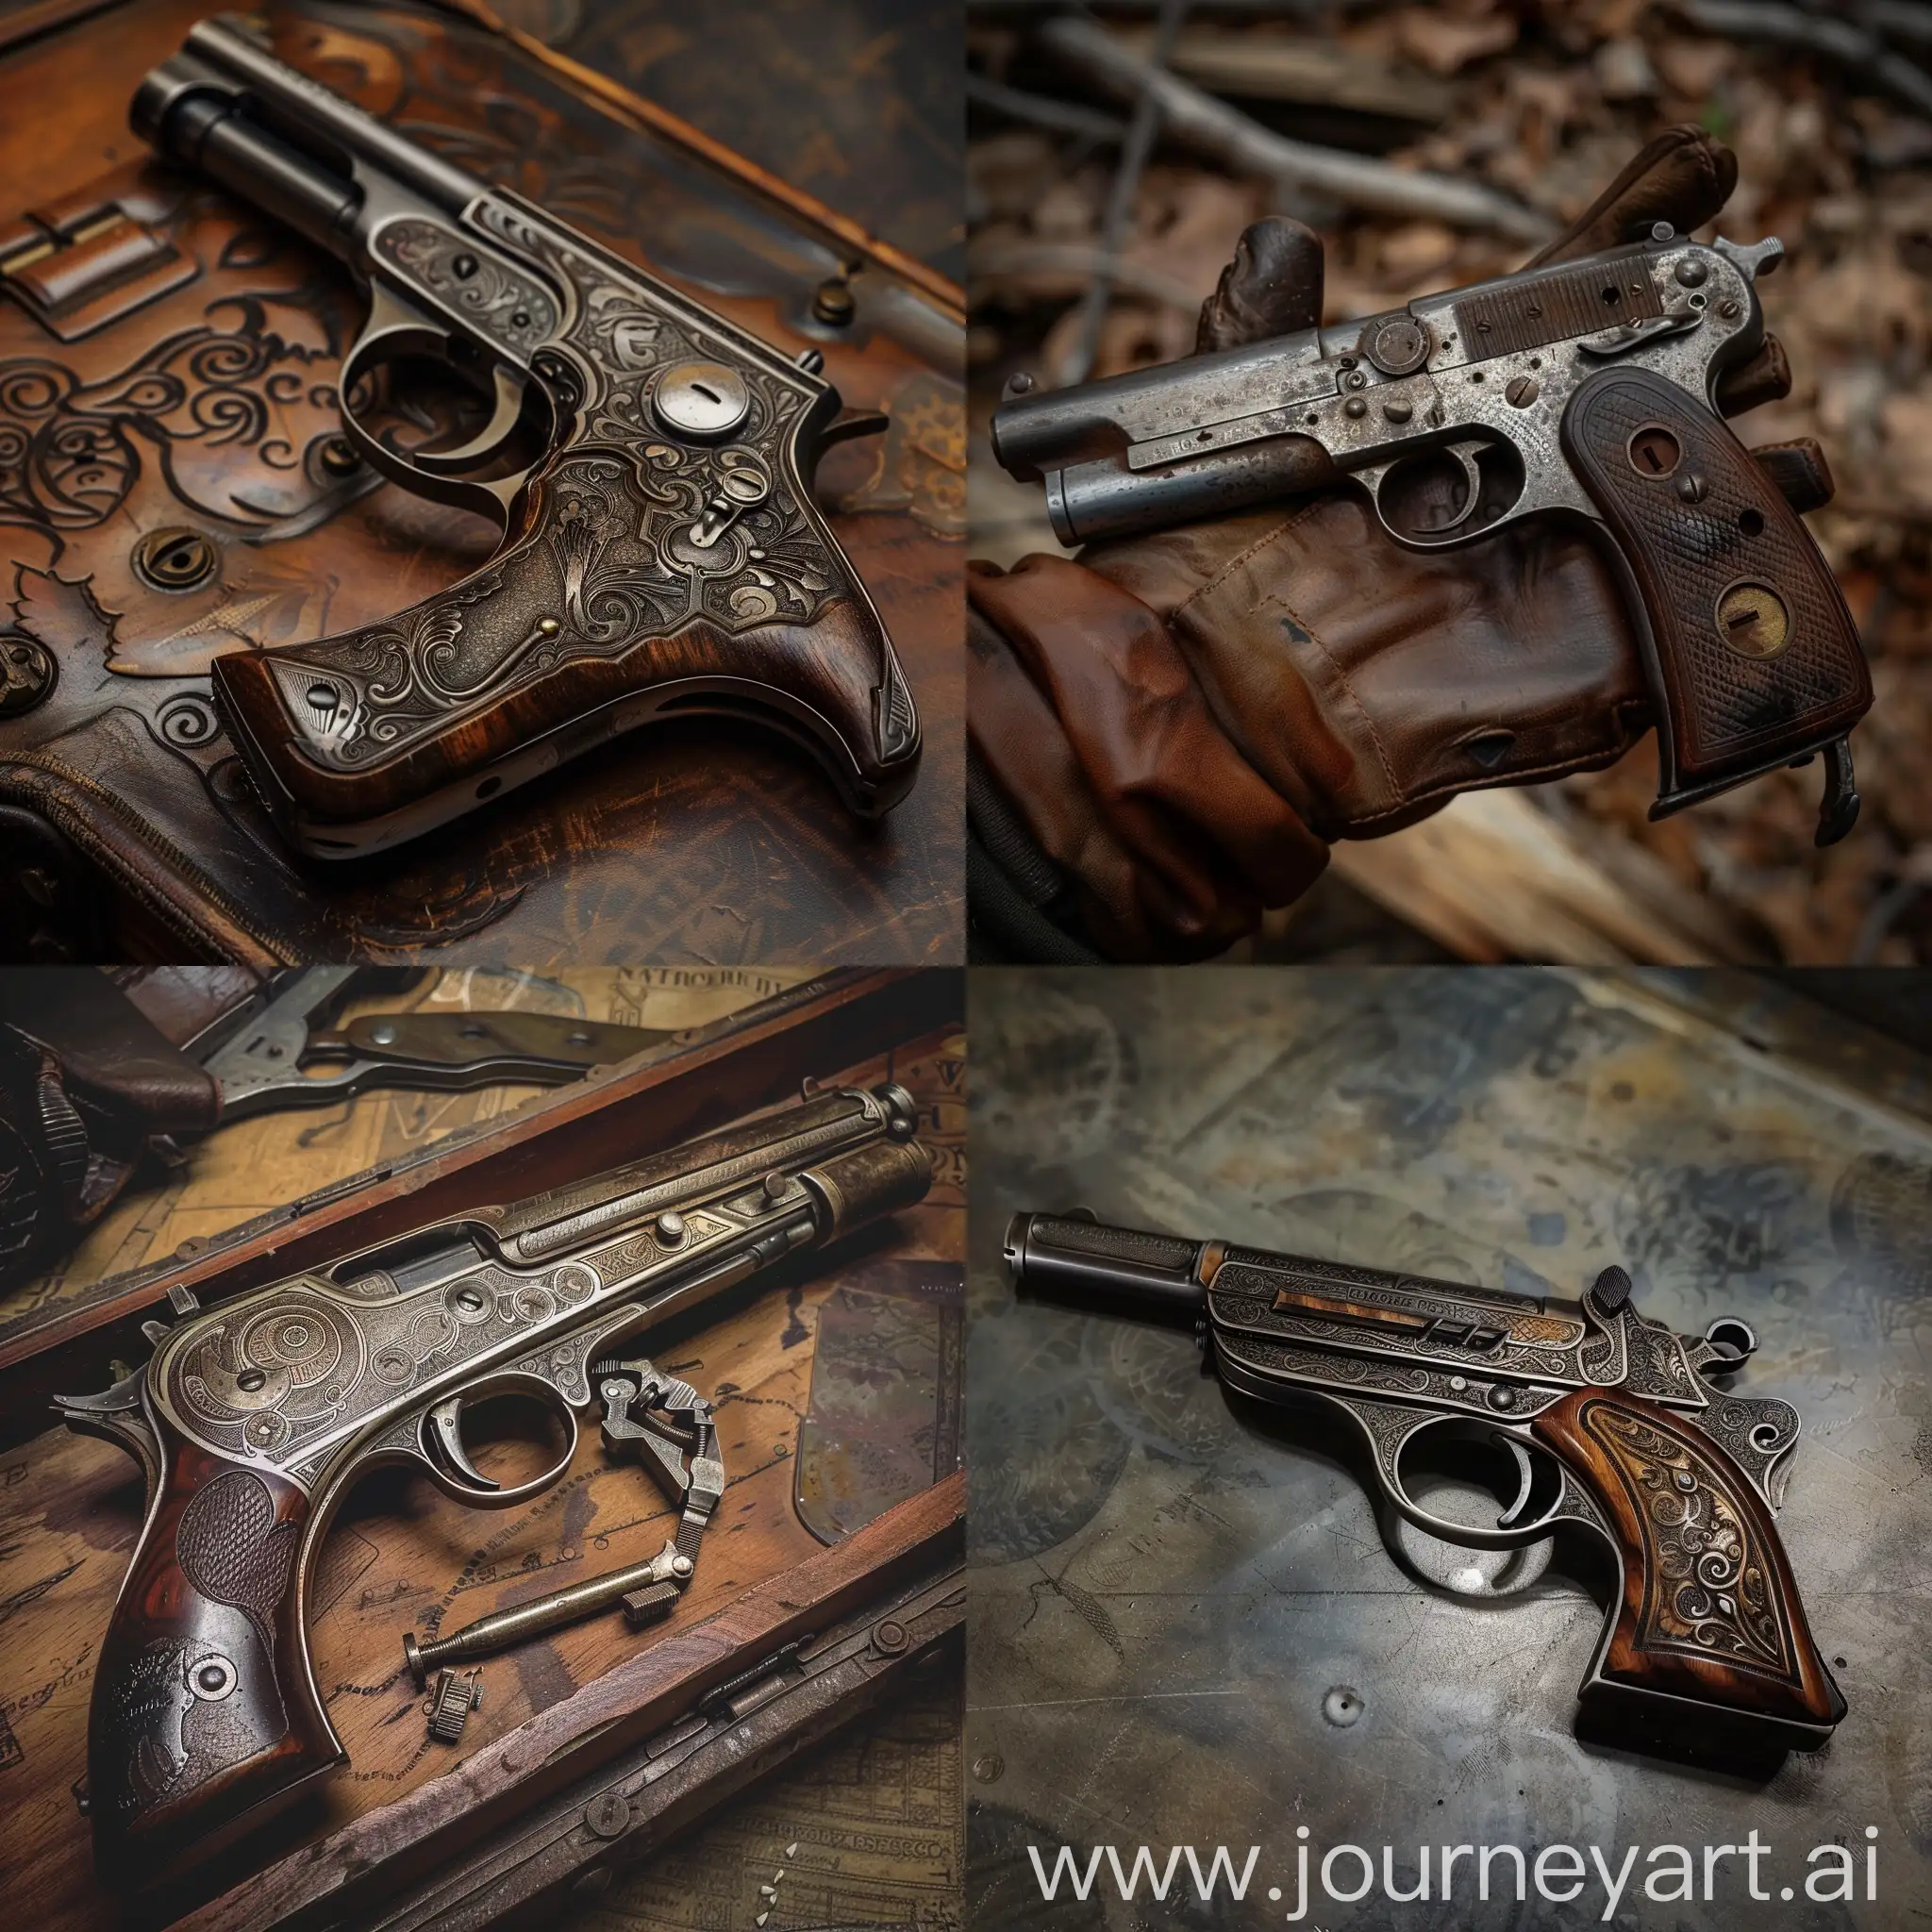 Luger-1912-Pistol-on-Wooden-Surface-with-Dramatic-Lighting